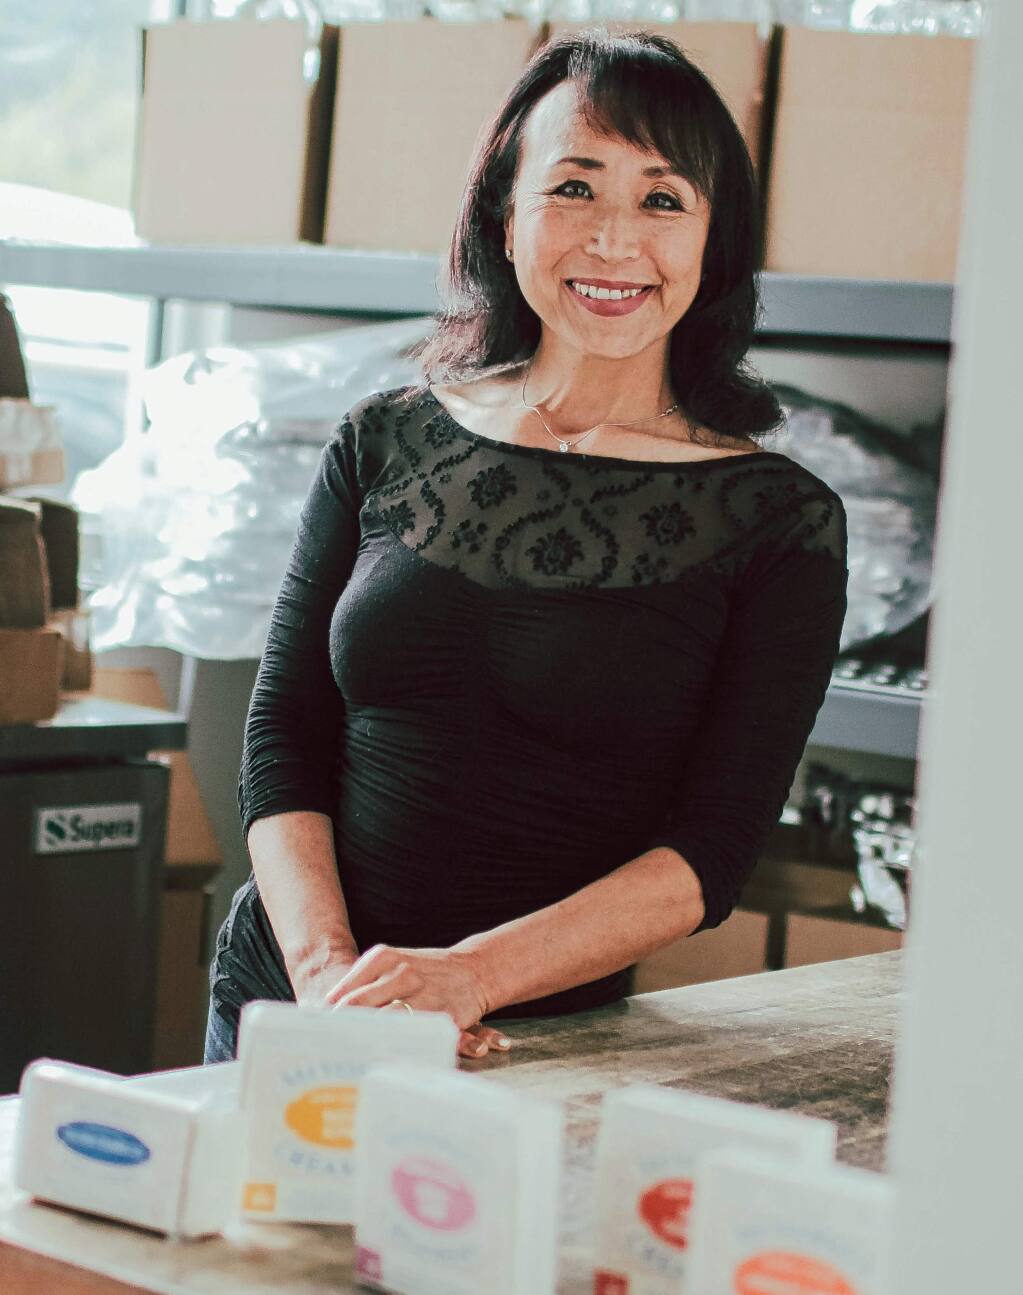 Mikoyo Schinner, founder of Mikoyo's Kitchen, in the Fairfax production facility on March 26, 2016 (COURTESY OF MIKOYO'S KITCHEN)